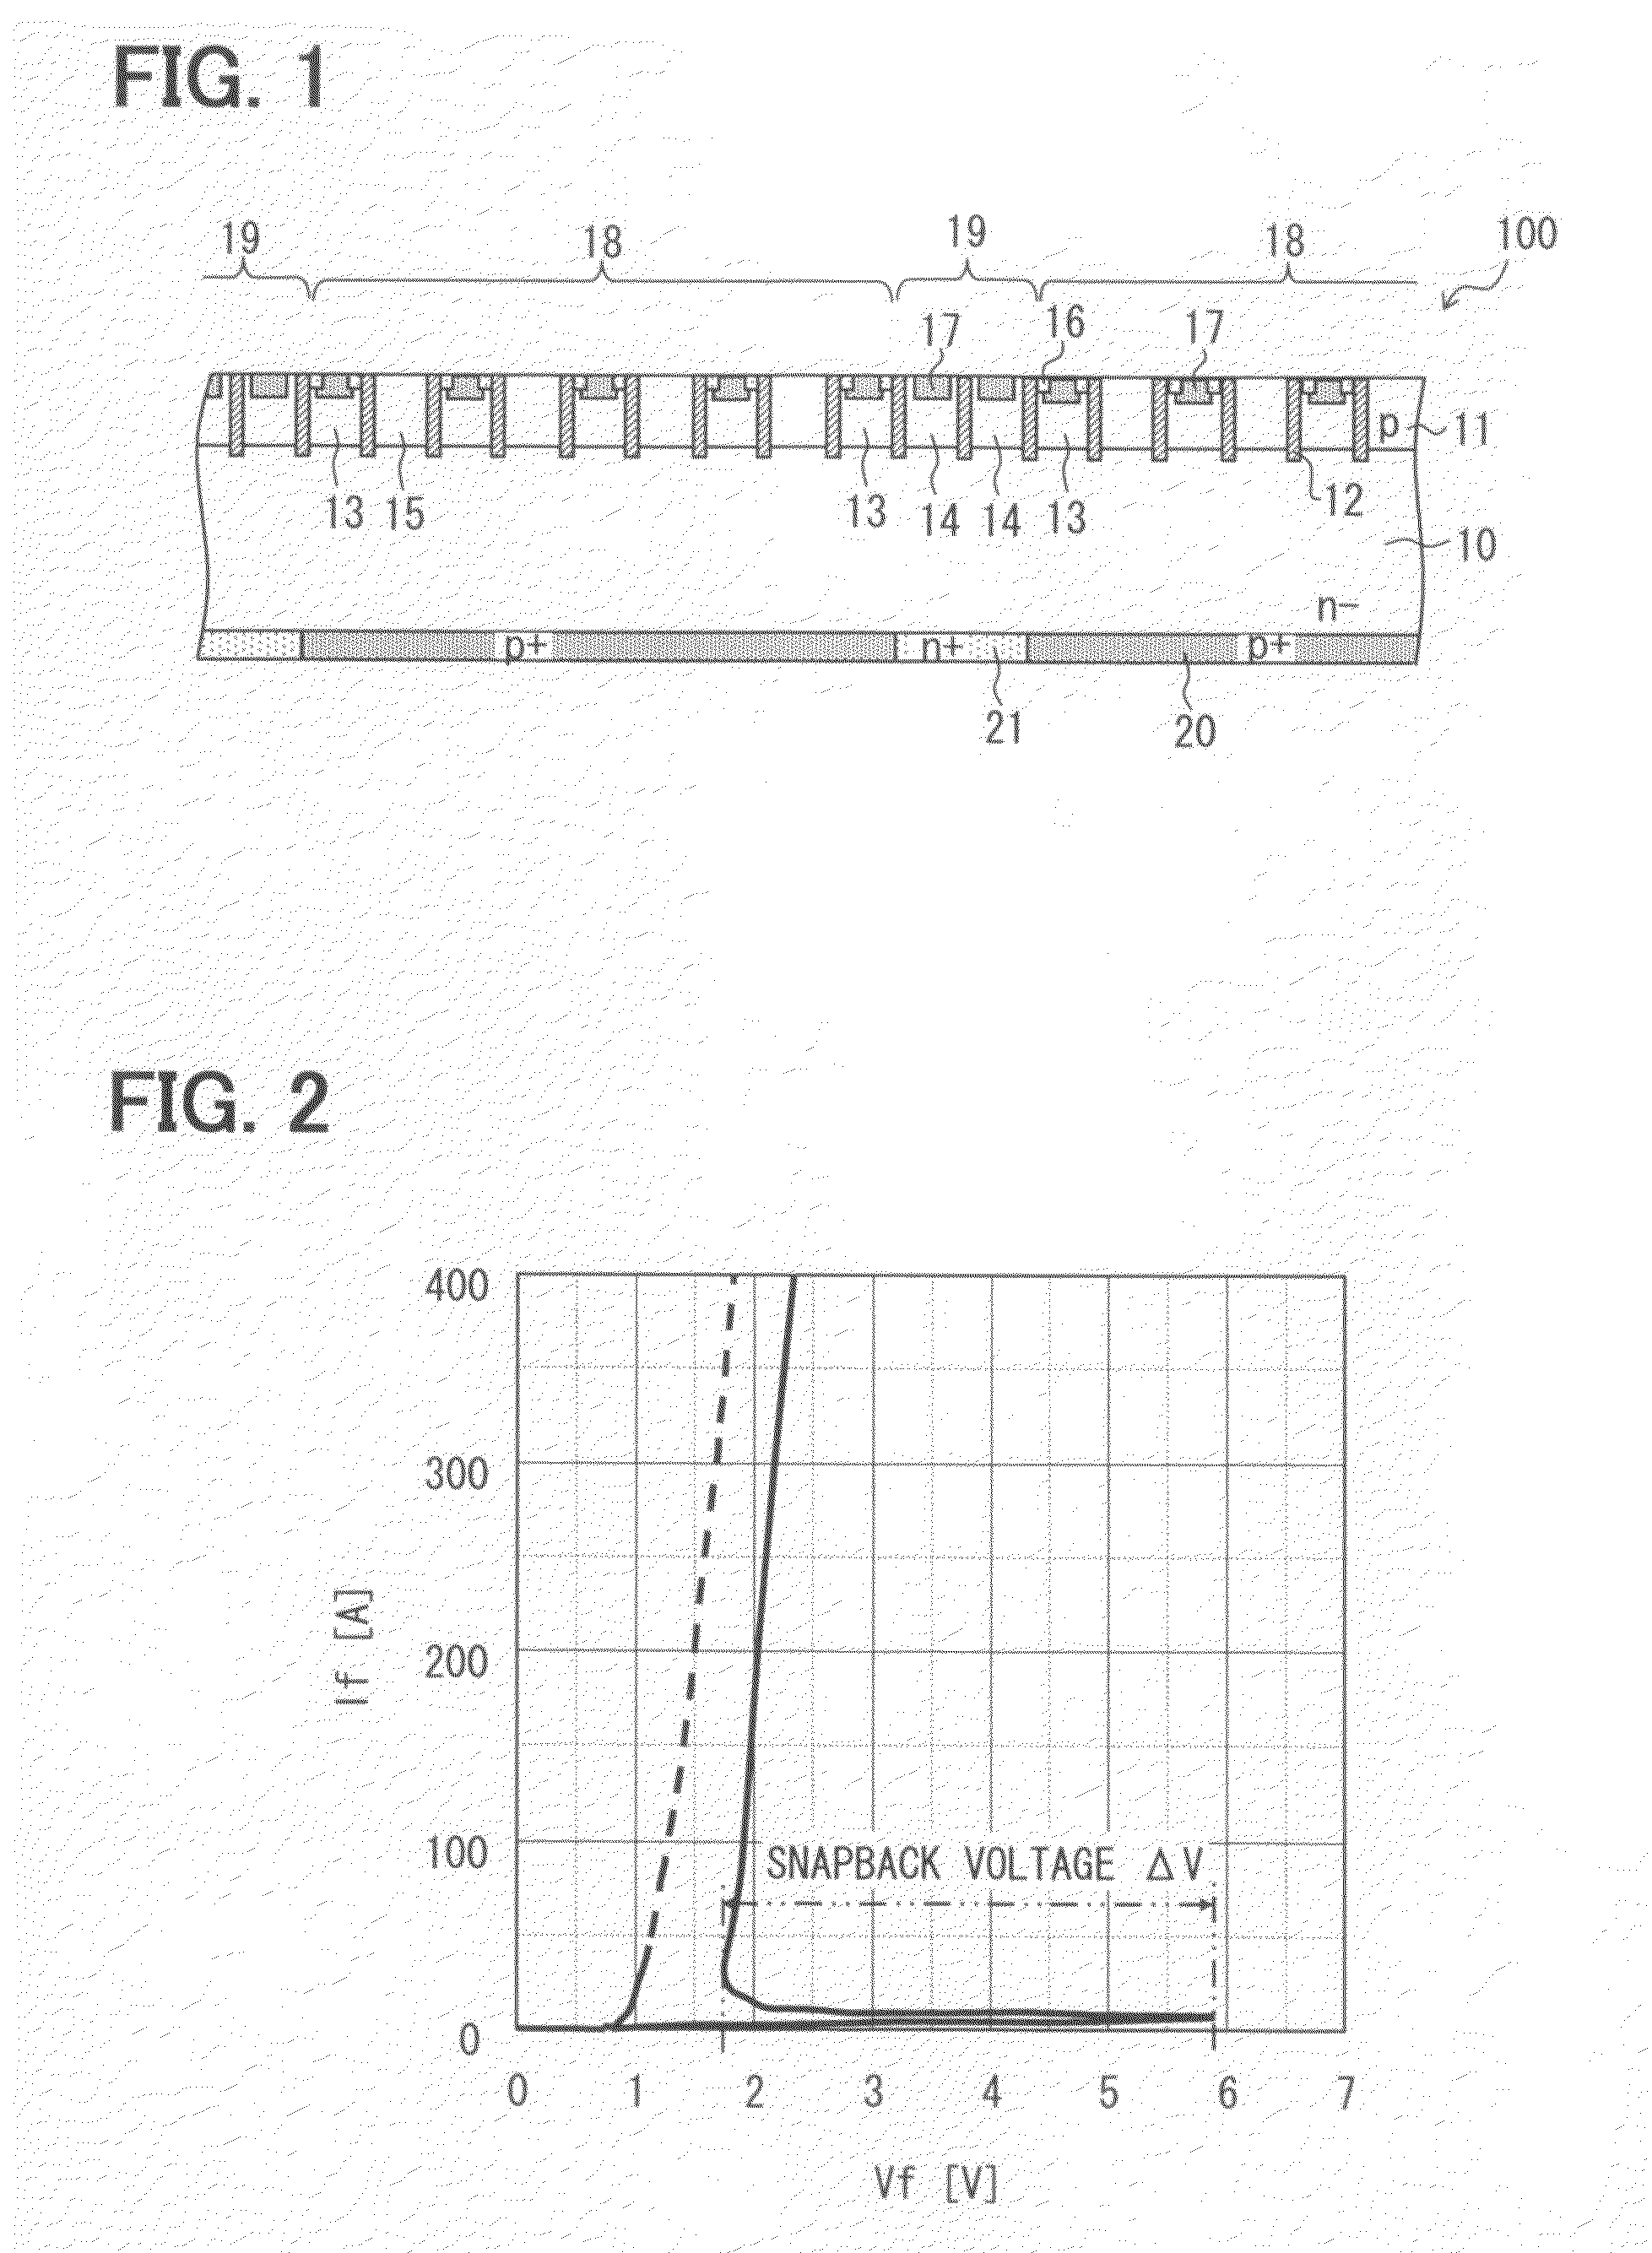 Semiconductor device including insulated gate bipolar transistor and diode